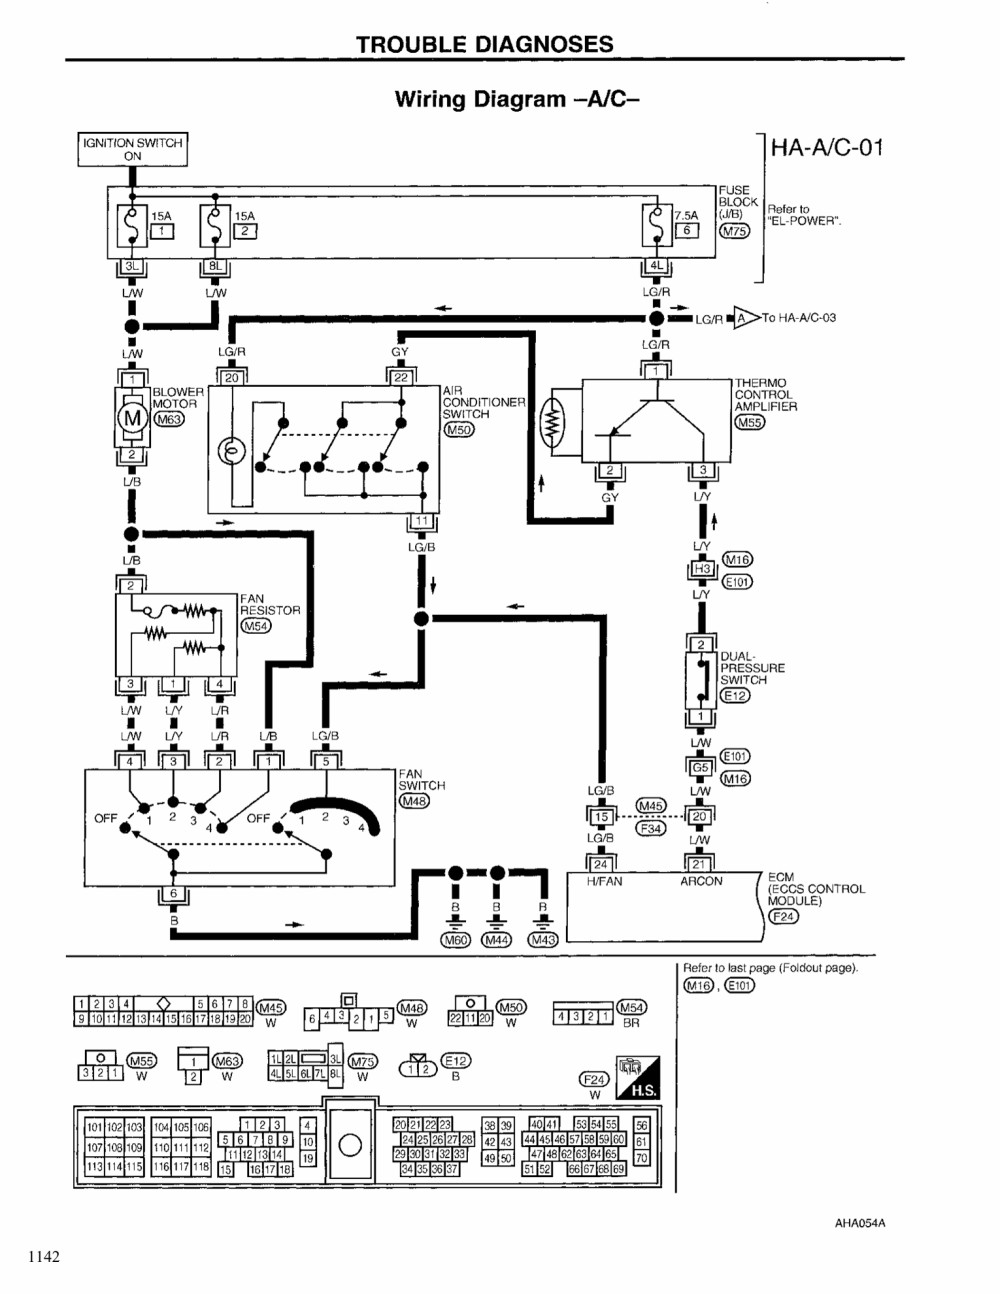 2003 Nissan Maxima Stereo Wiring Diagram from mainetreasurechest.com